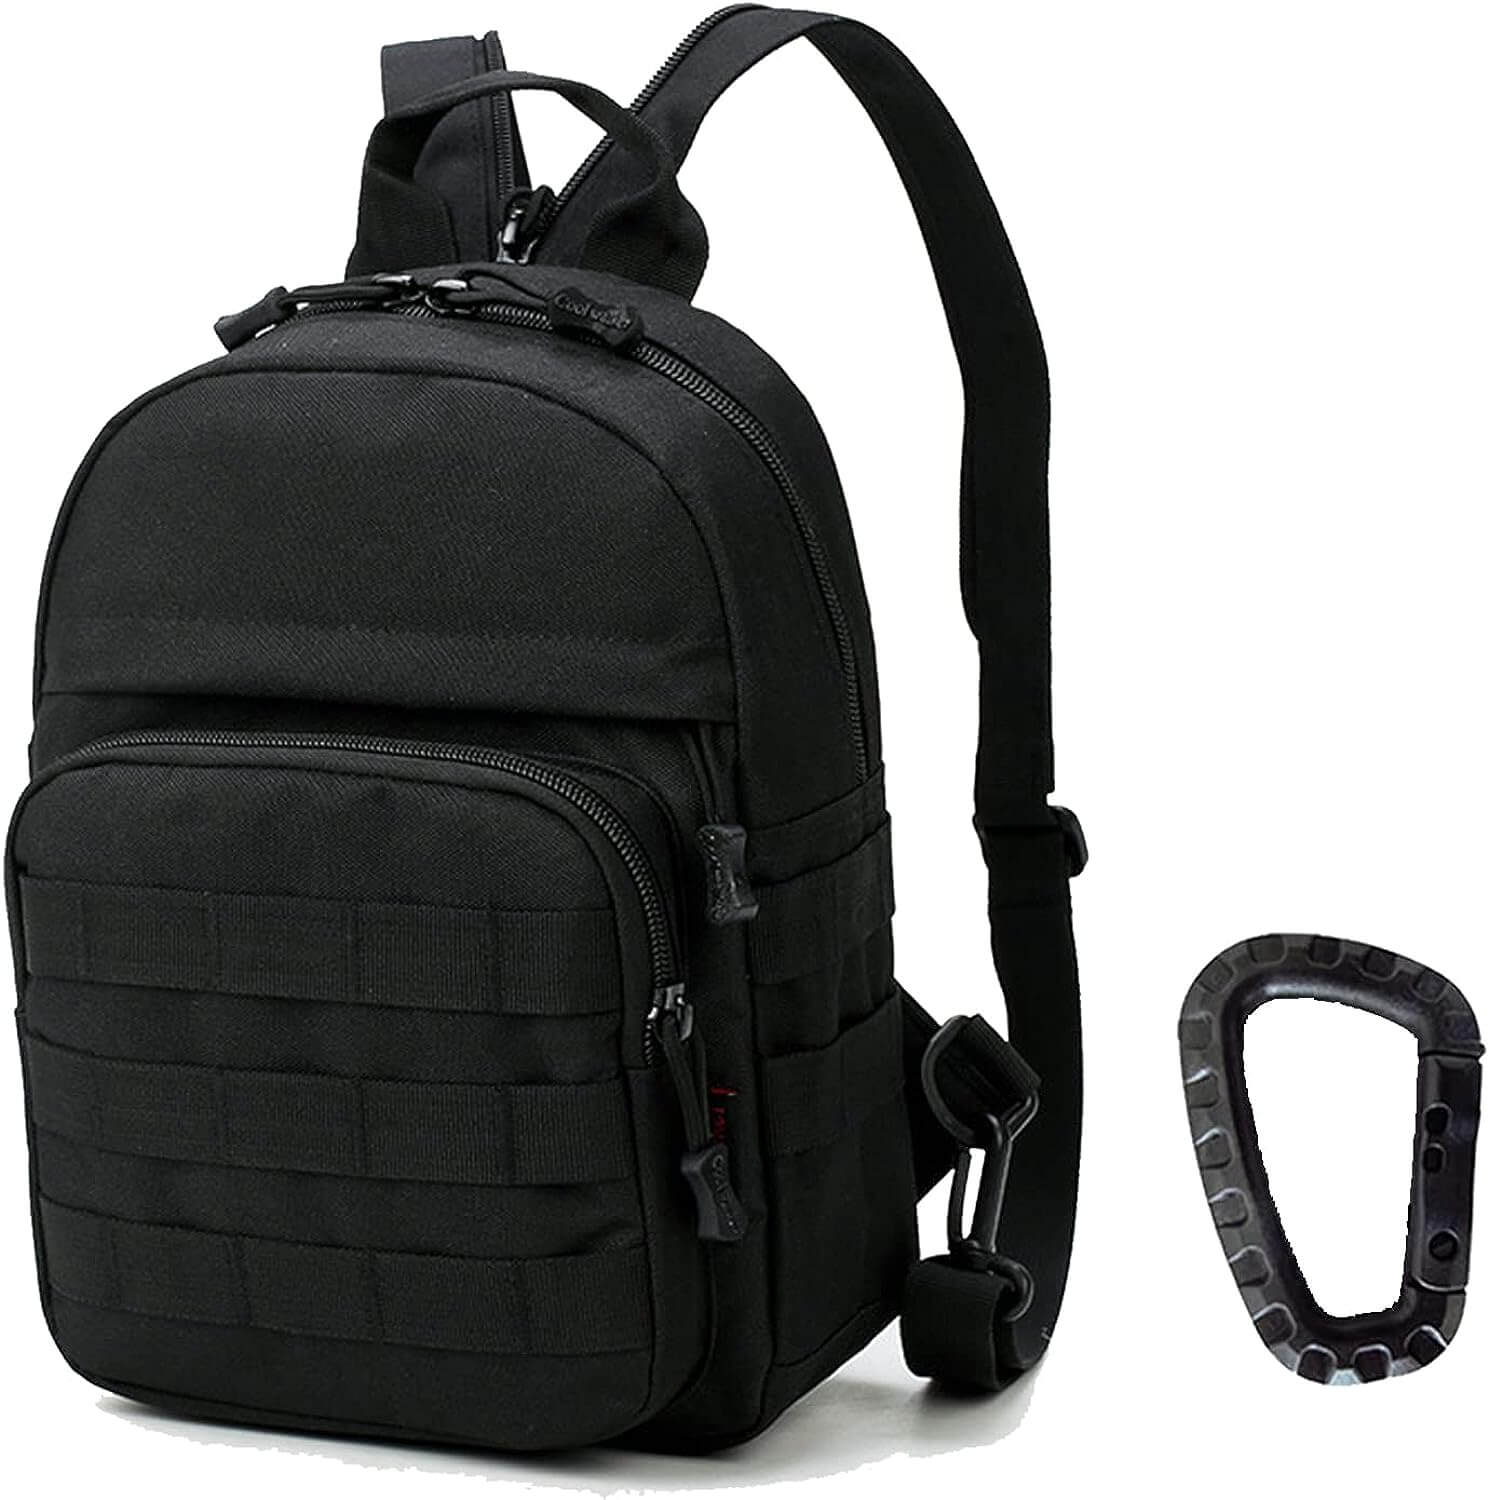 Mini Tactical Backpack Review